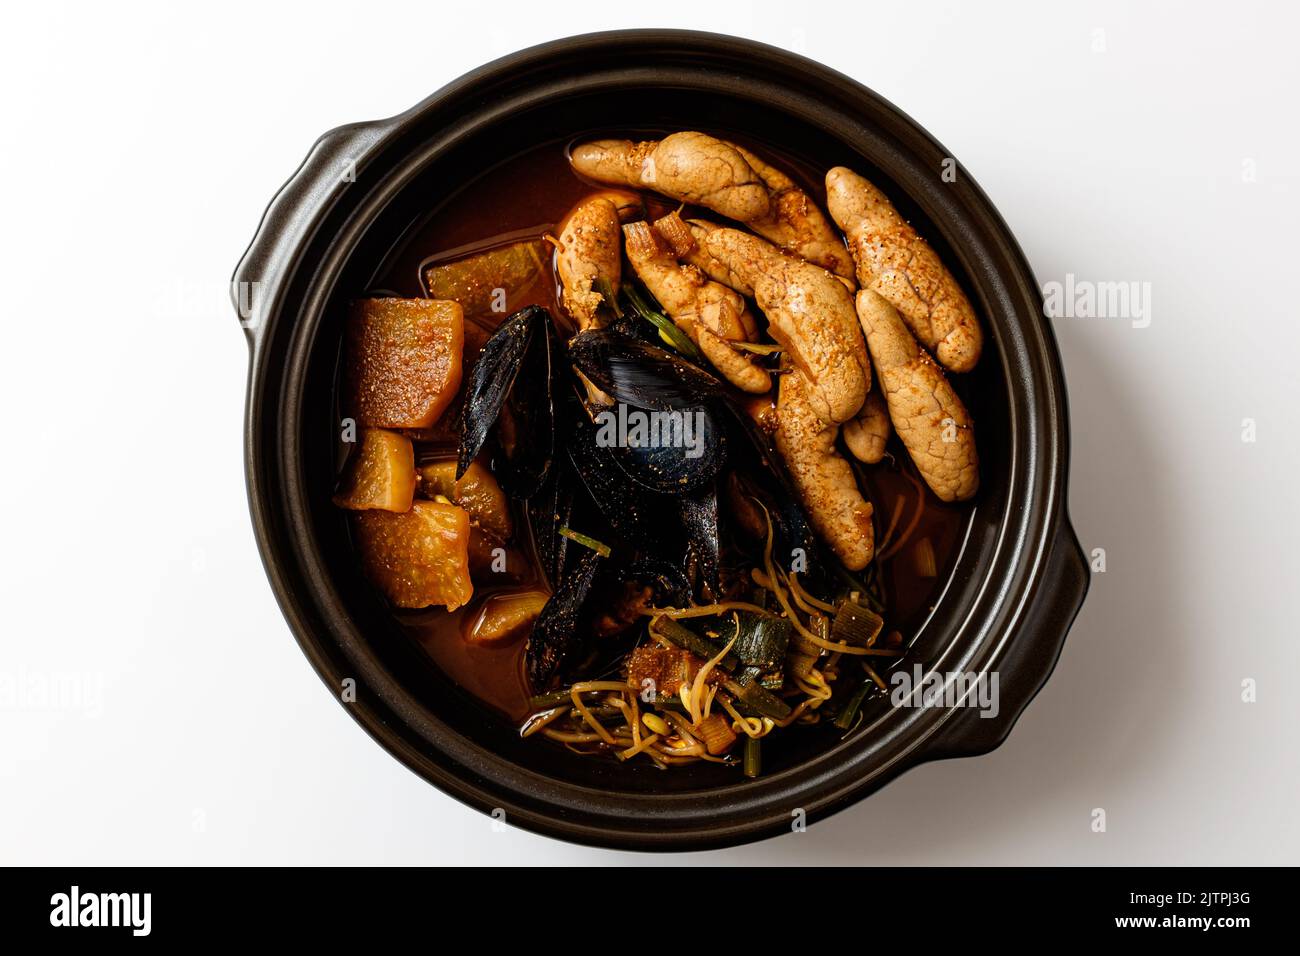 Korean food culture. Food with pollack roe. Spicy soup dish with seafood and vegetables Stock Photo